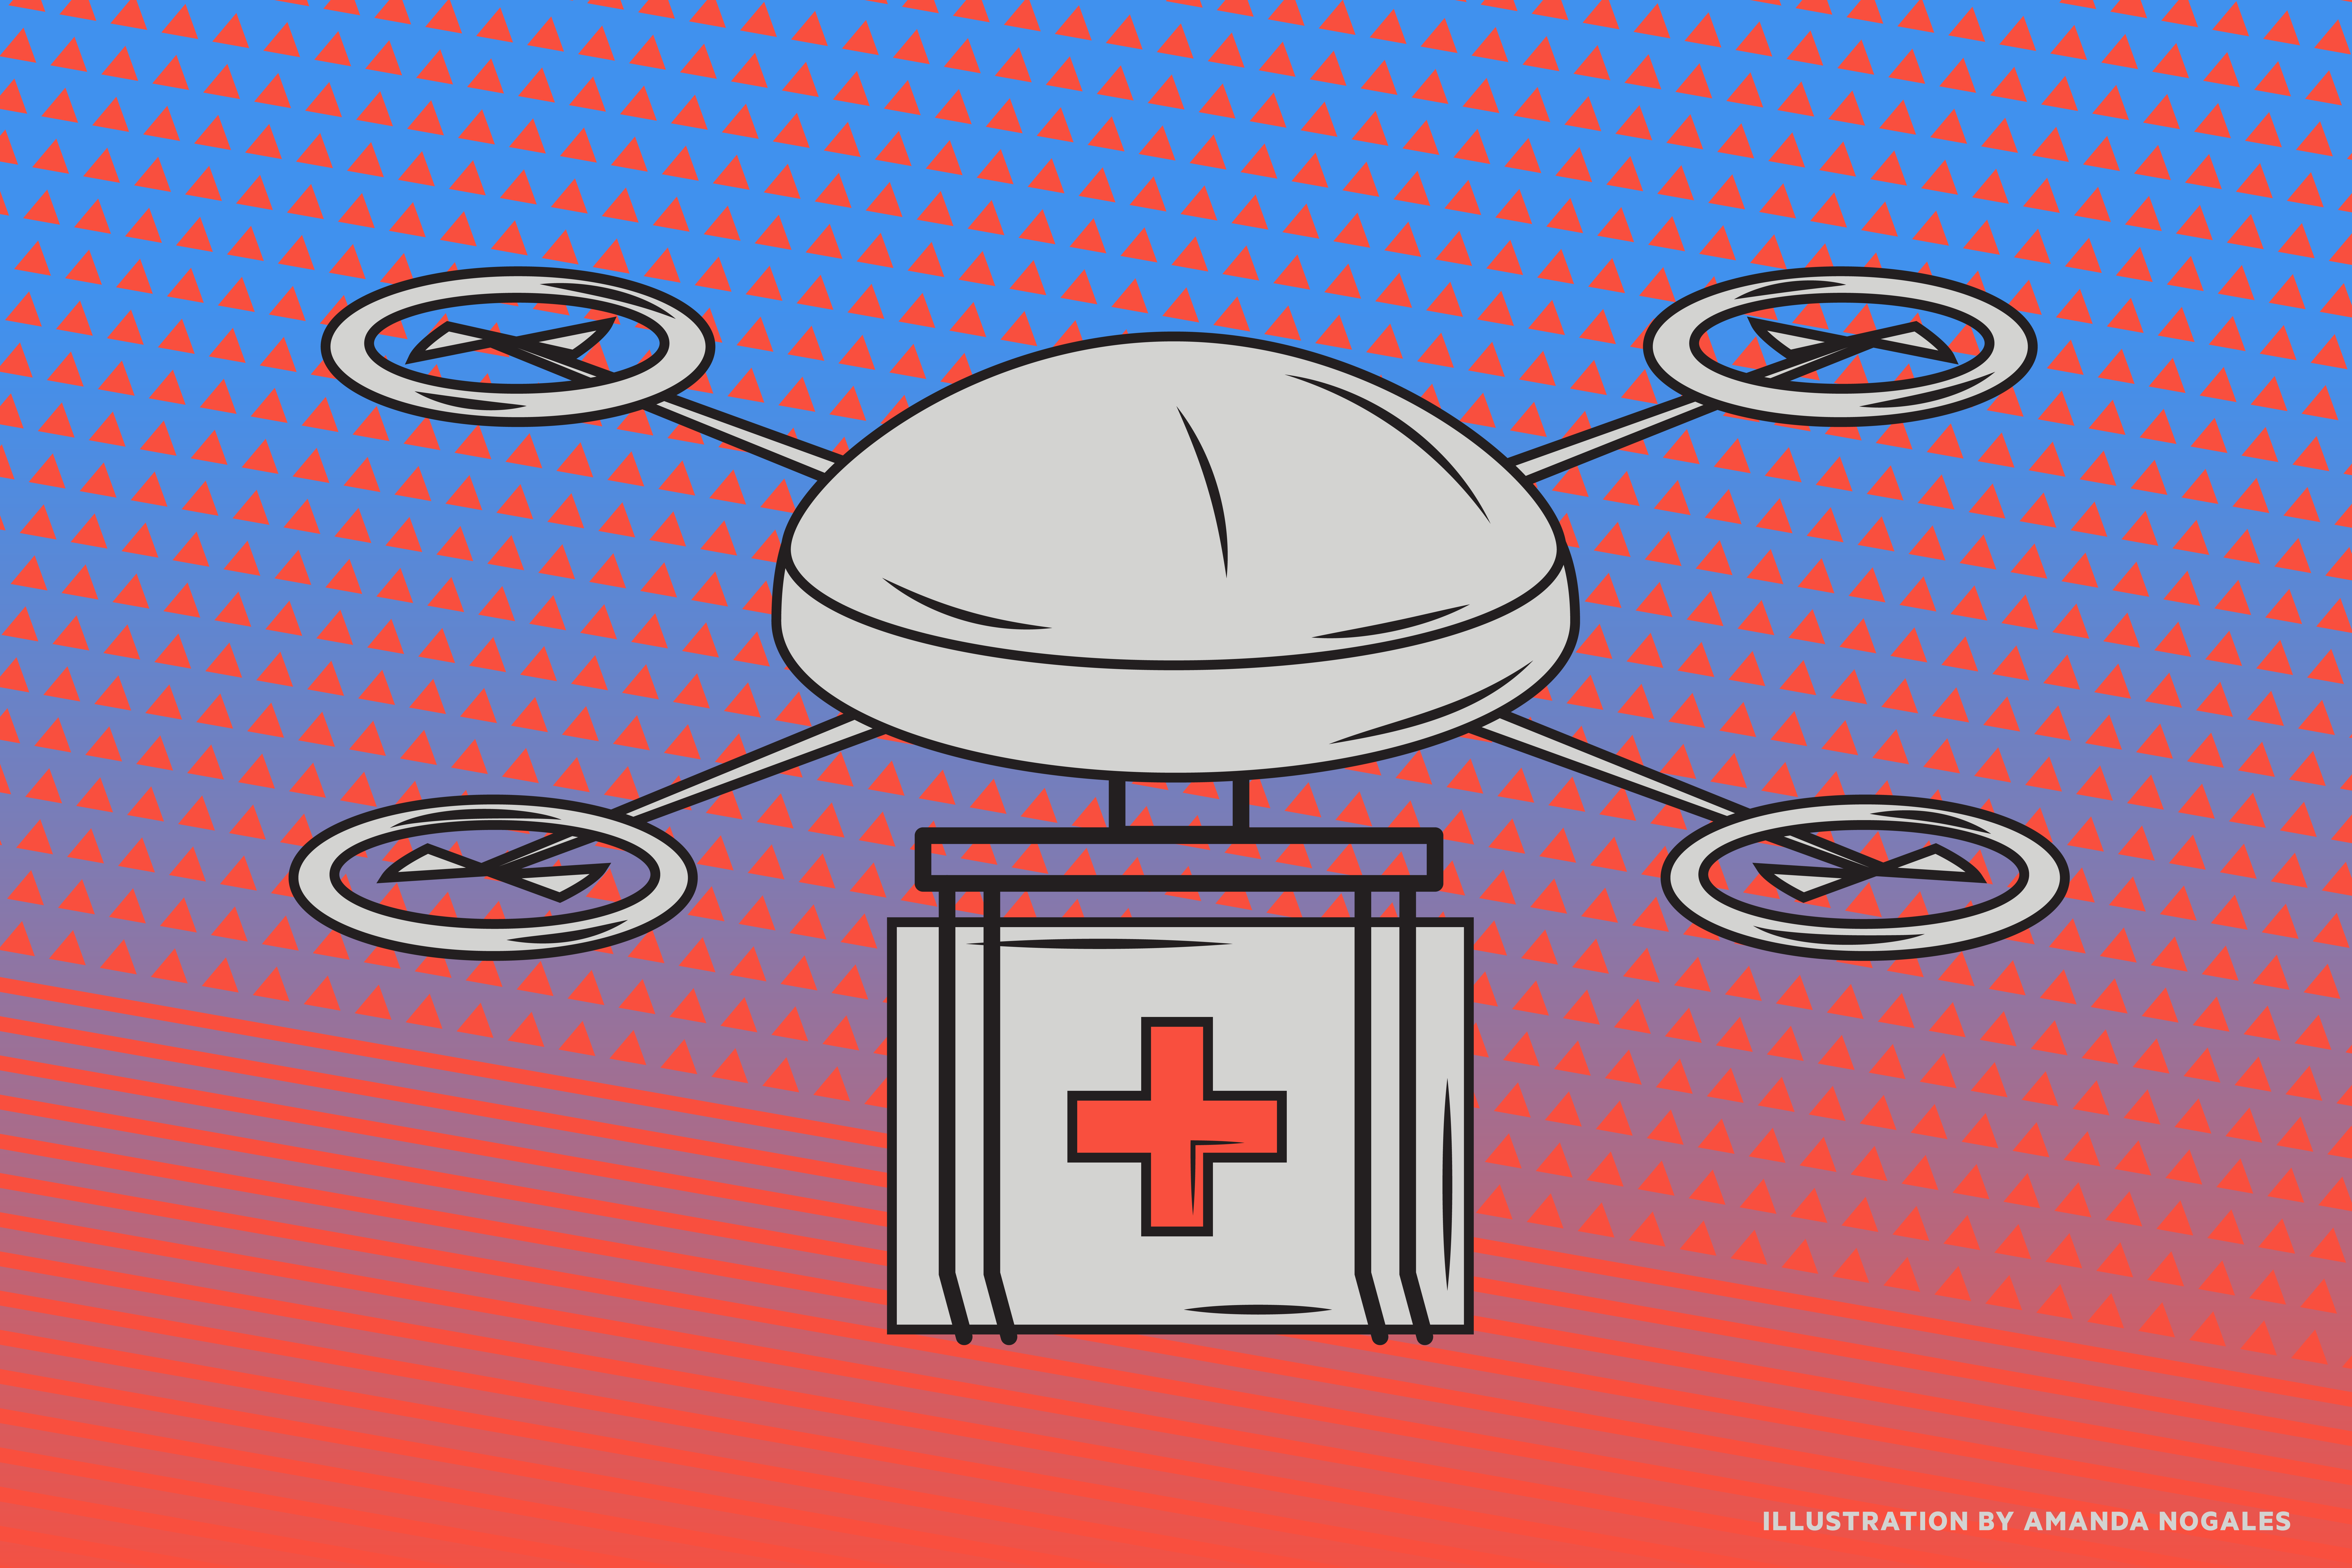 Prescription pill drone delivery is coming, thanks to San Francisco based startup, Zipline.